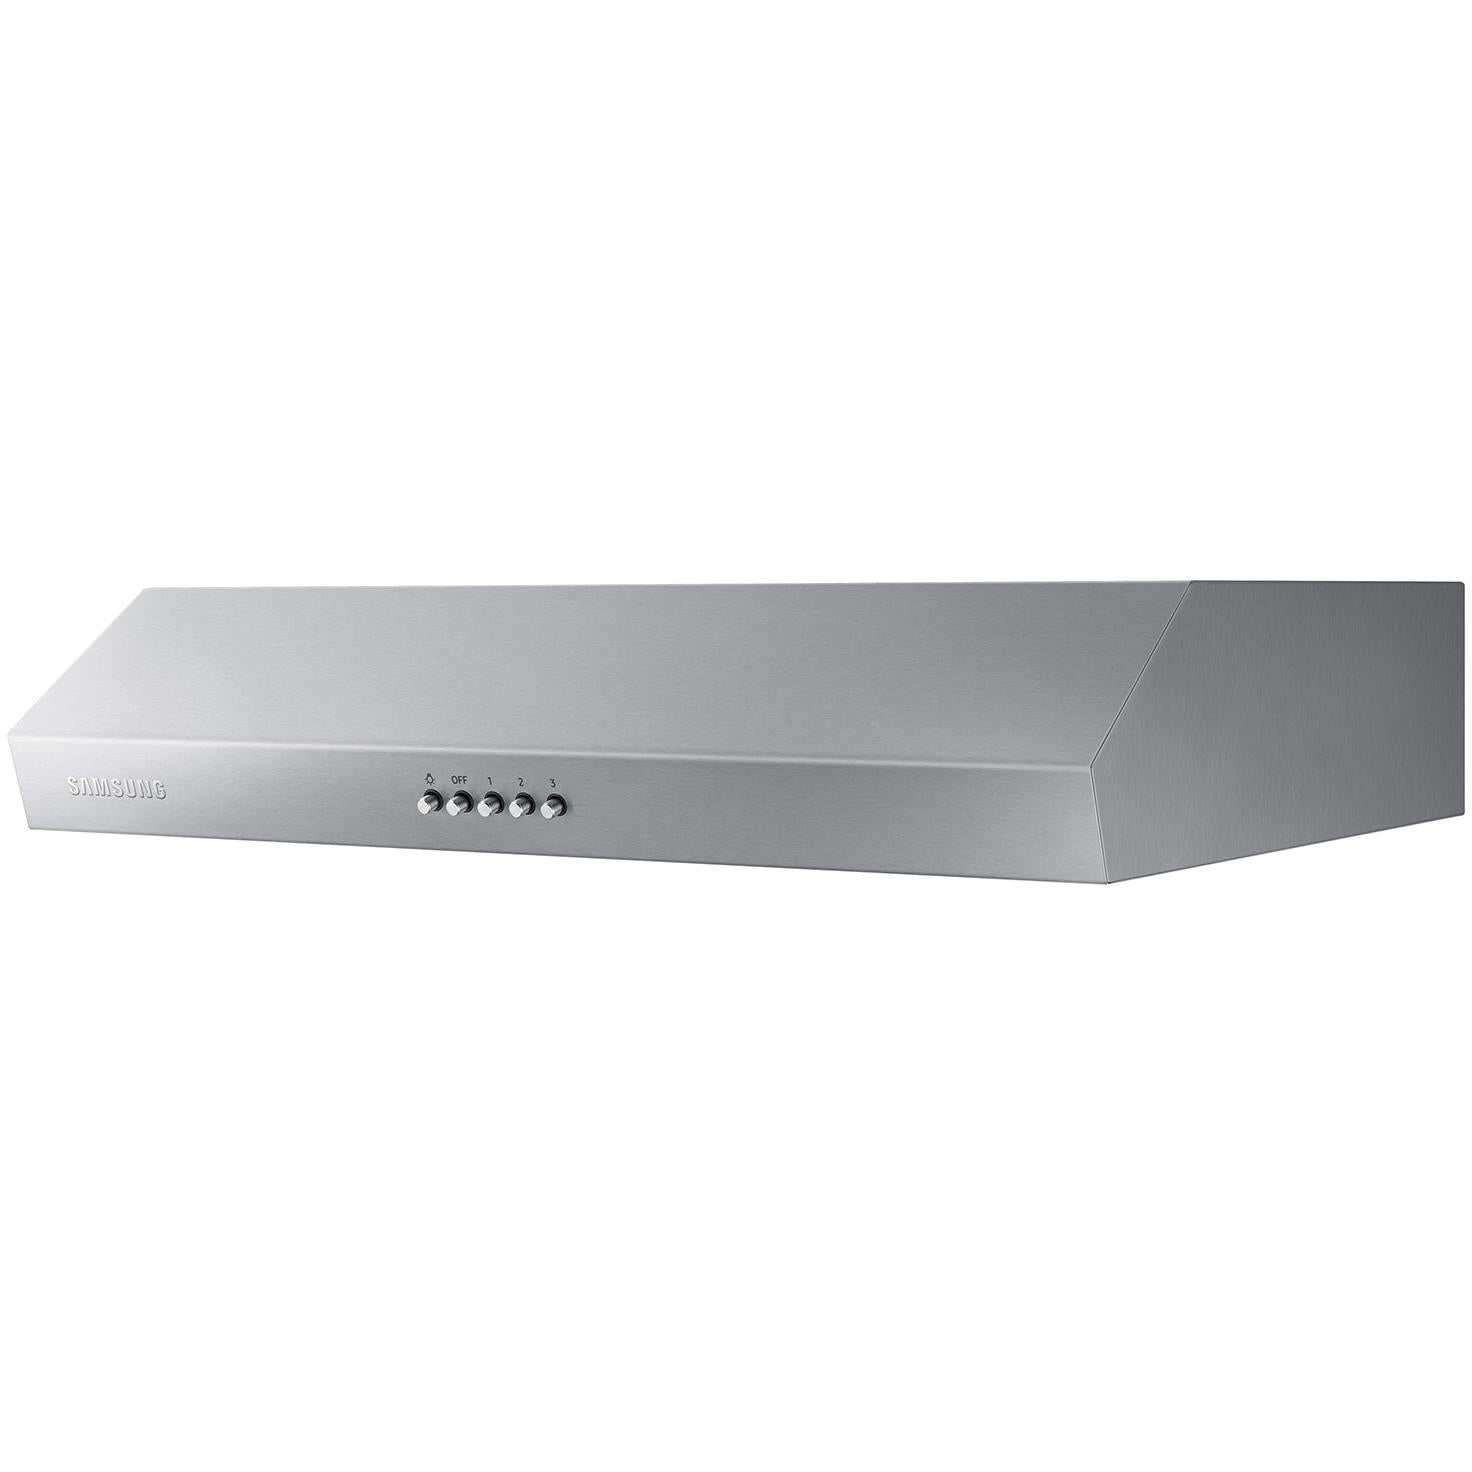 Samsung 24-inch Under Cabinet Range Hood with LED Lighting NK24T4000US/AA